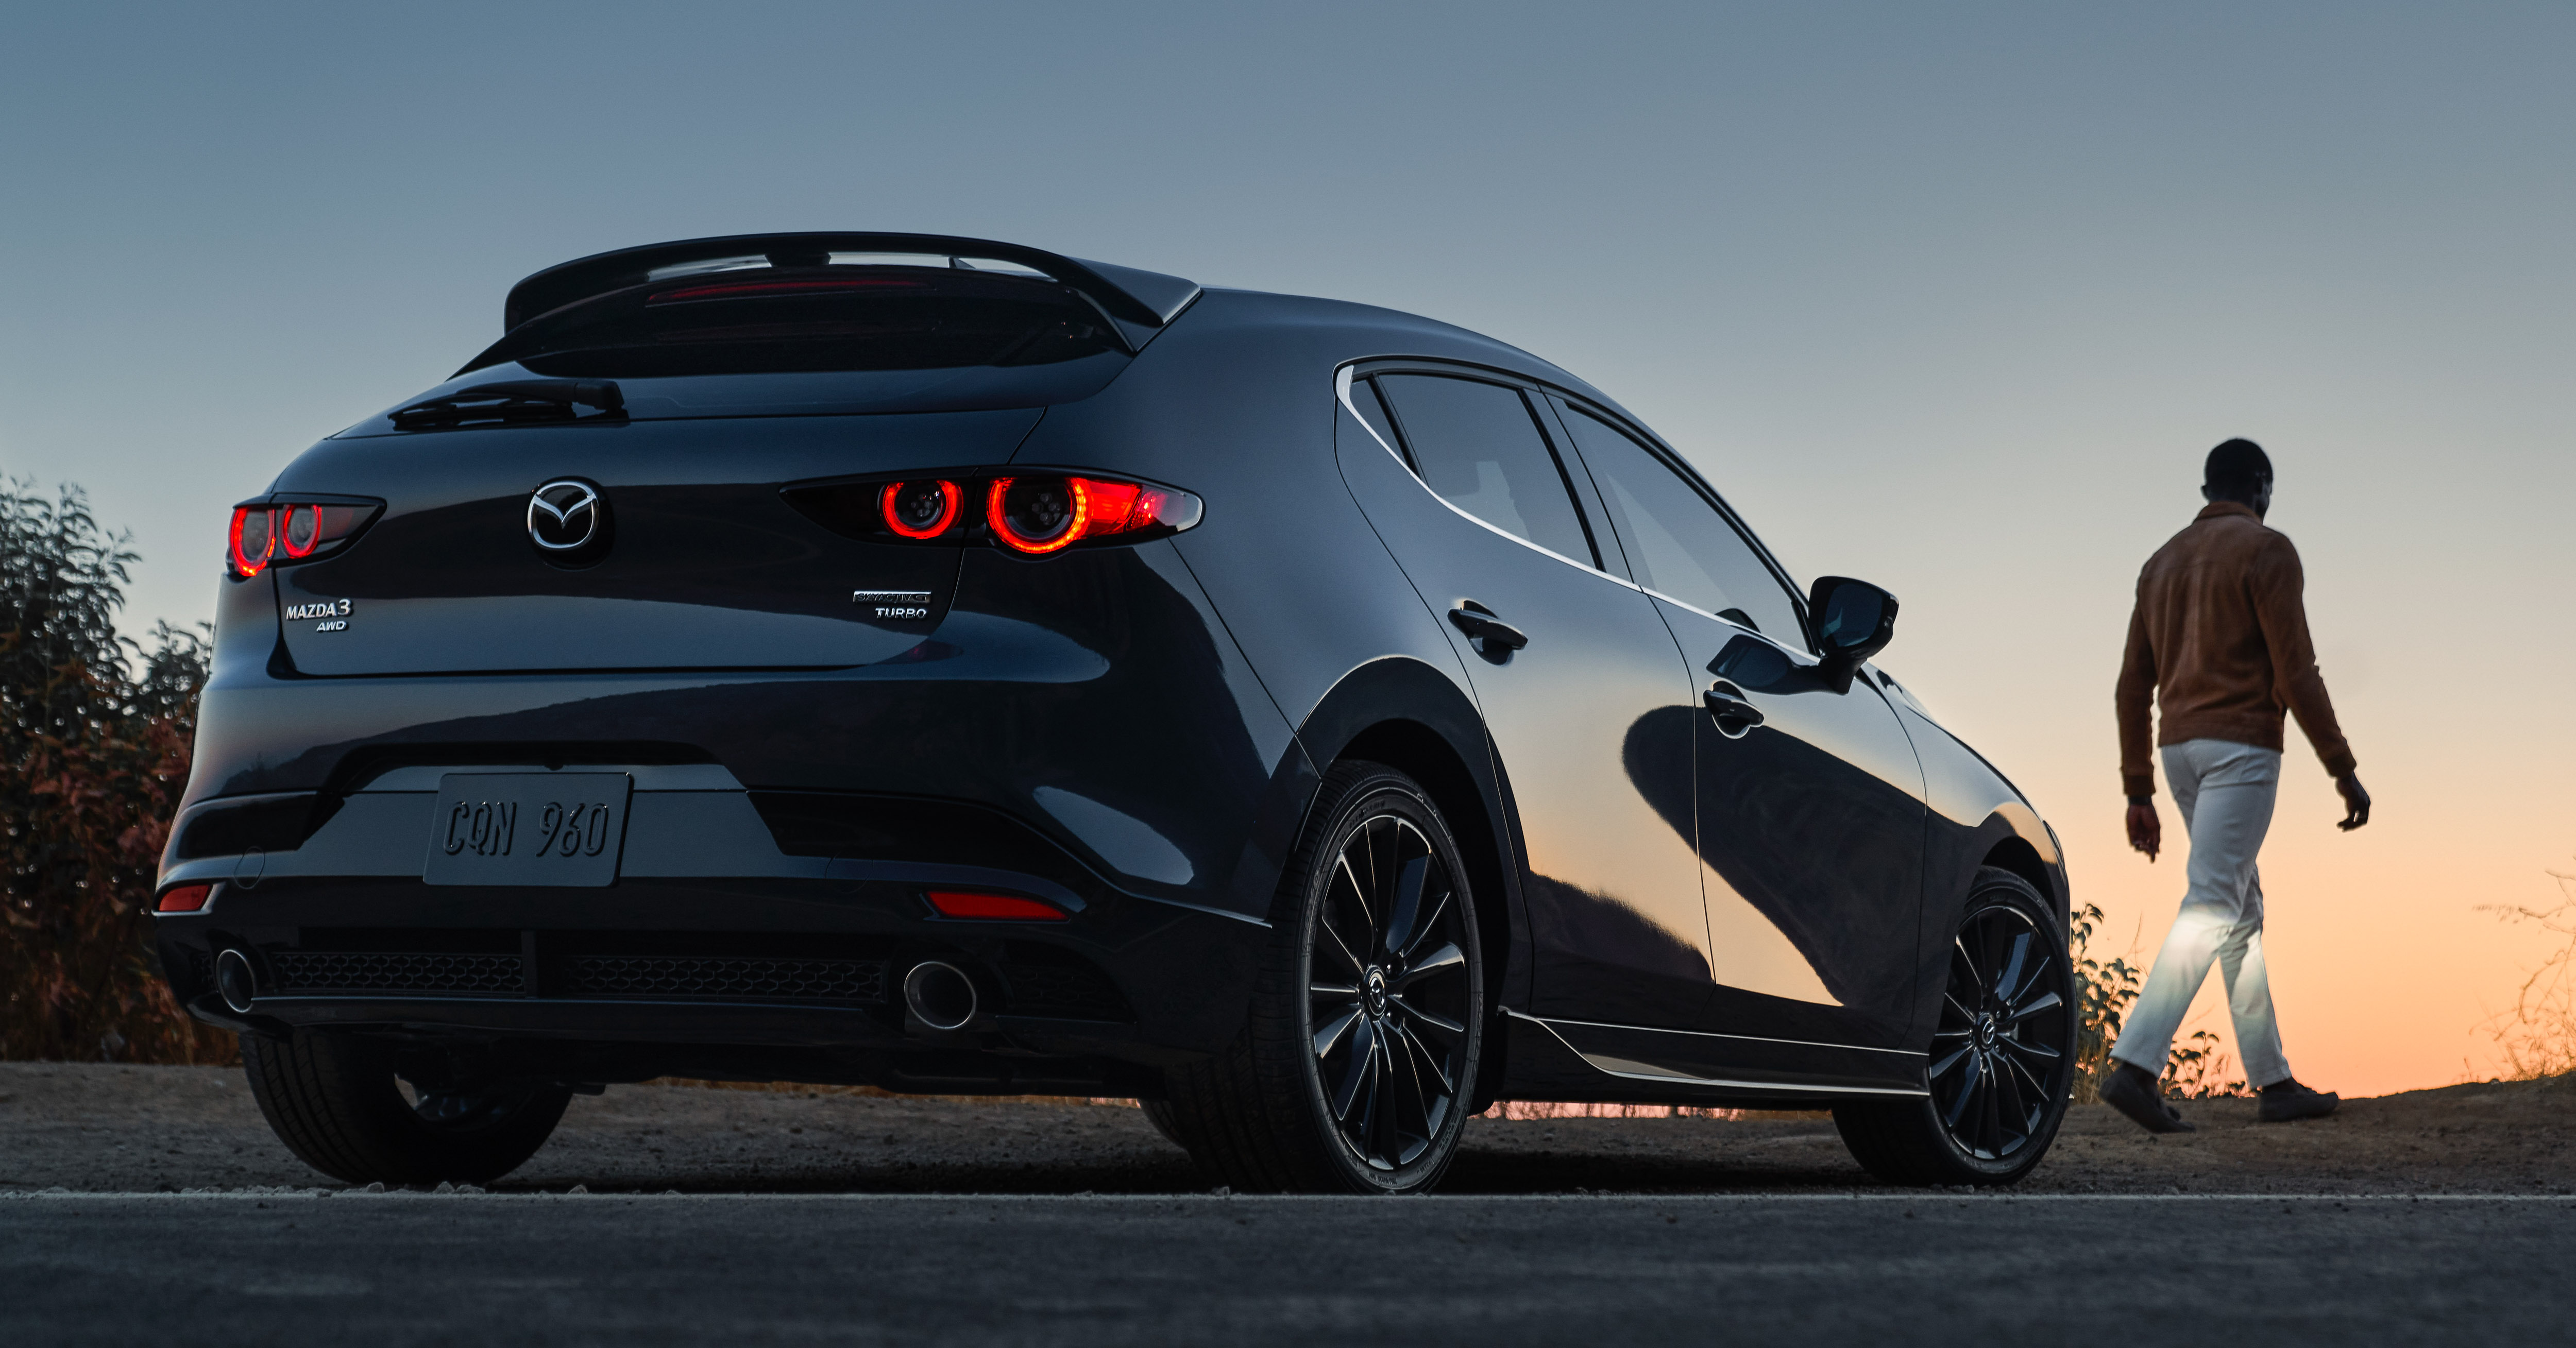 2021 mazda 3 turbo pricing revealed for the us - 46% more